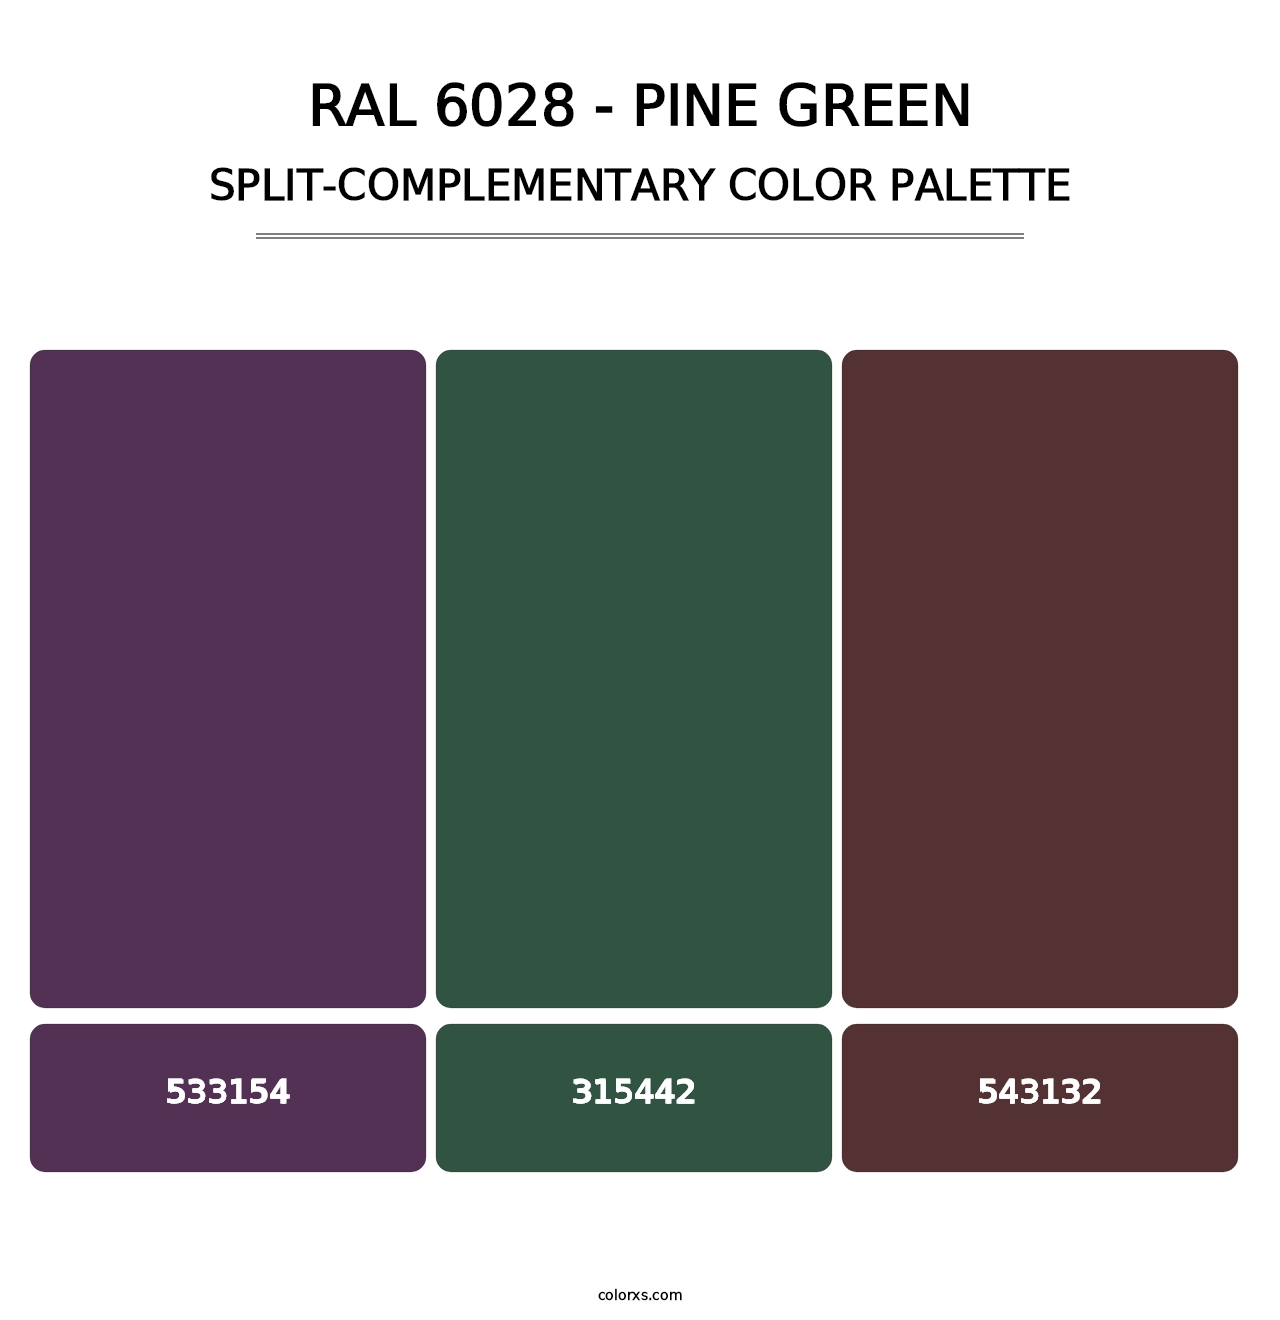 RAL 6028 - Pine Green - Split-Complementary Color Palette